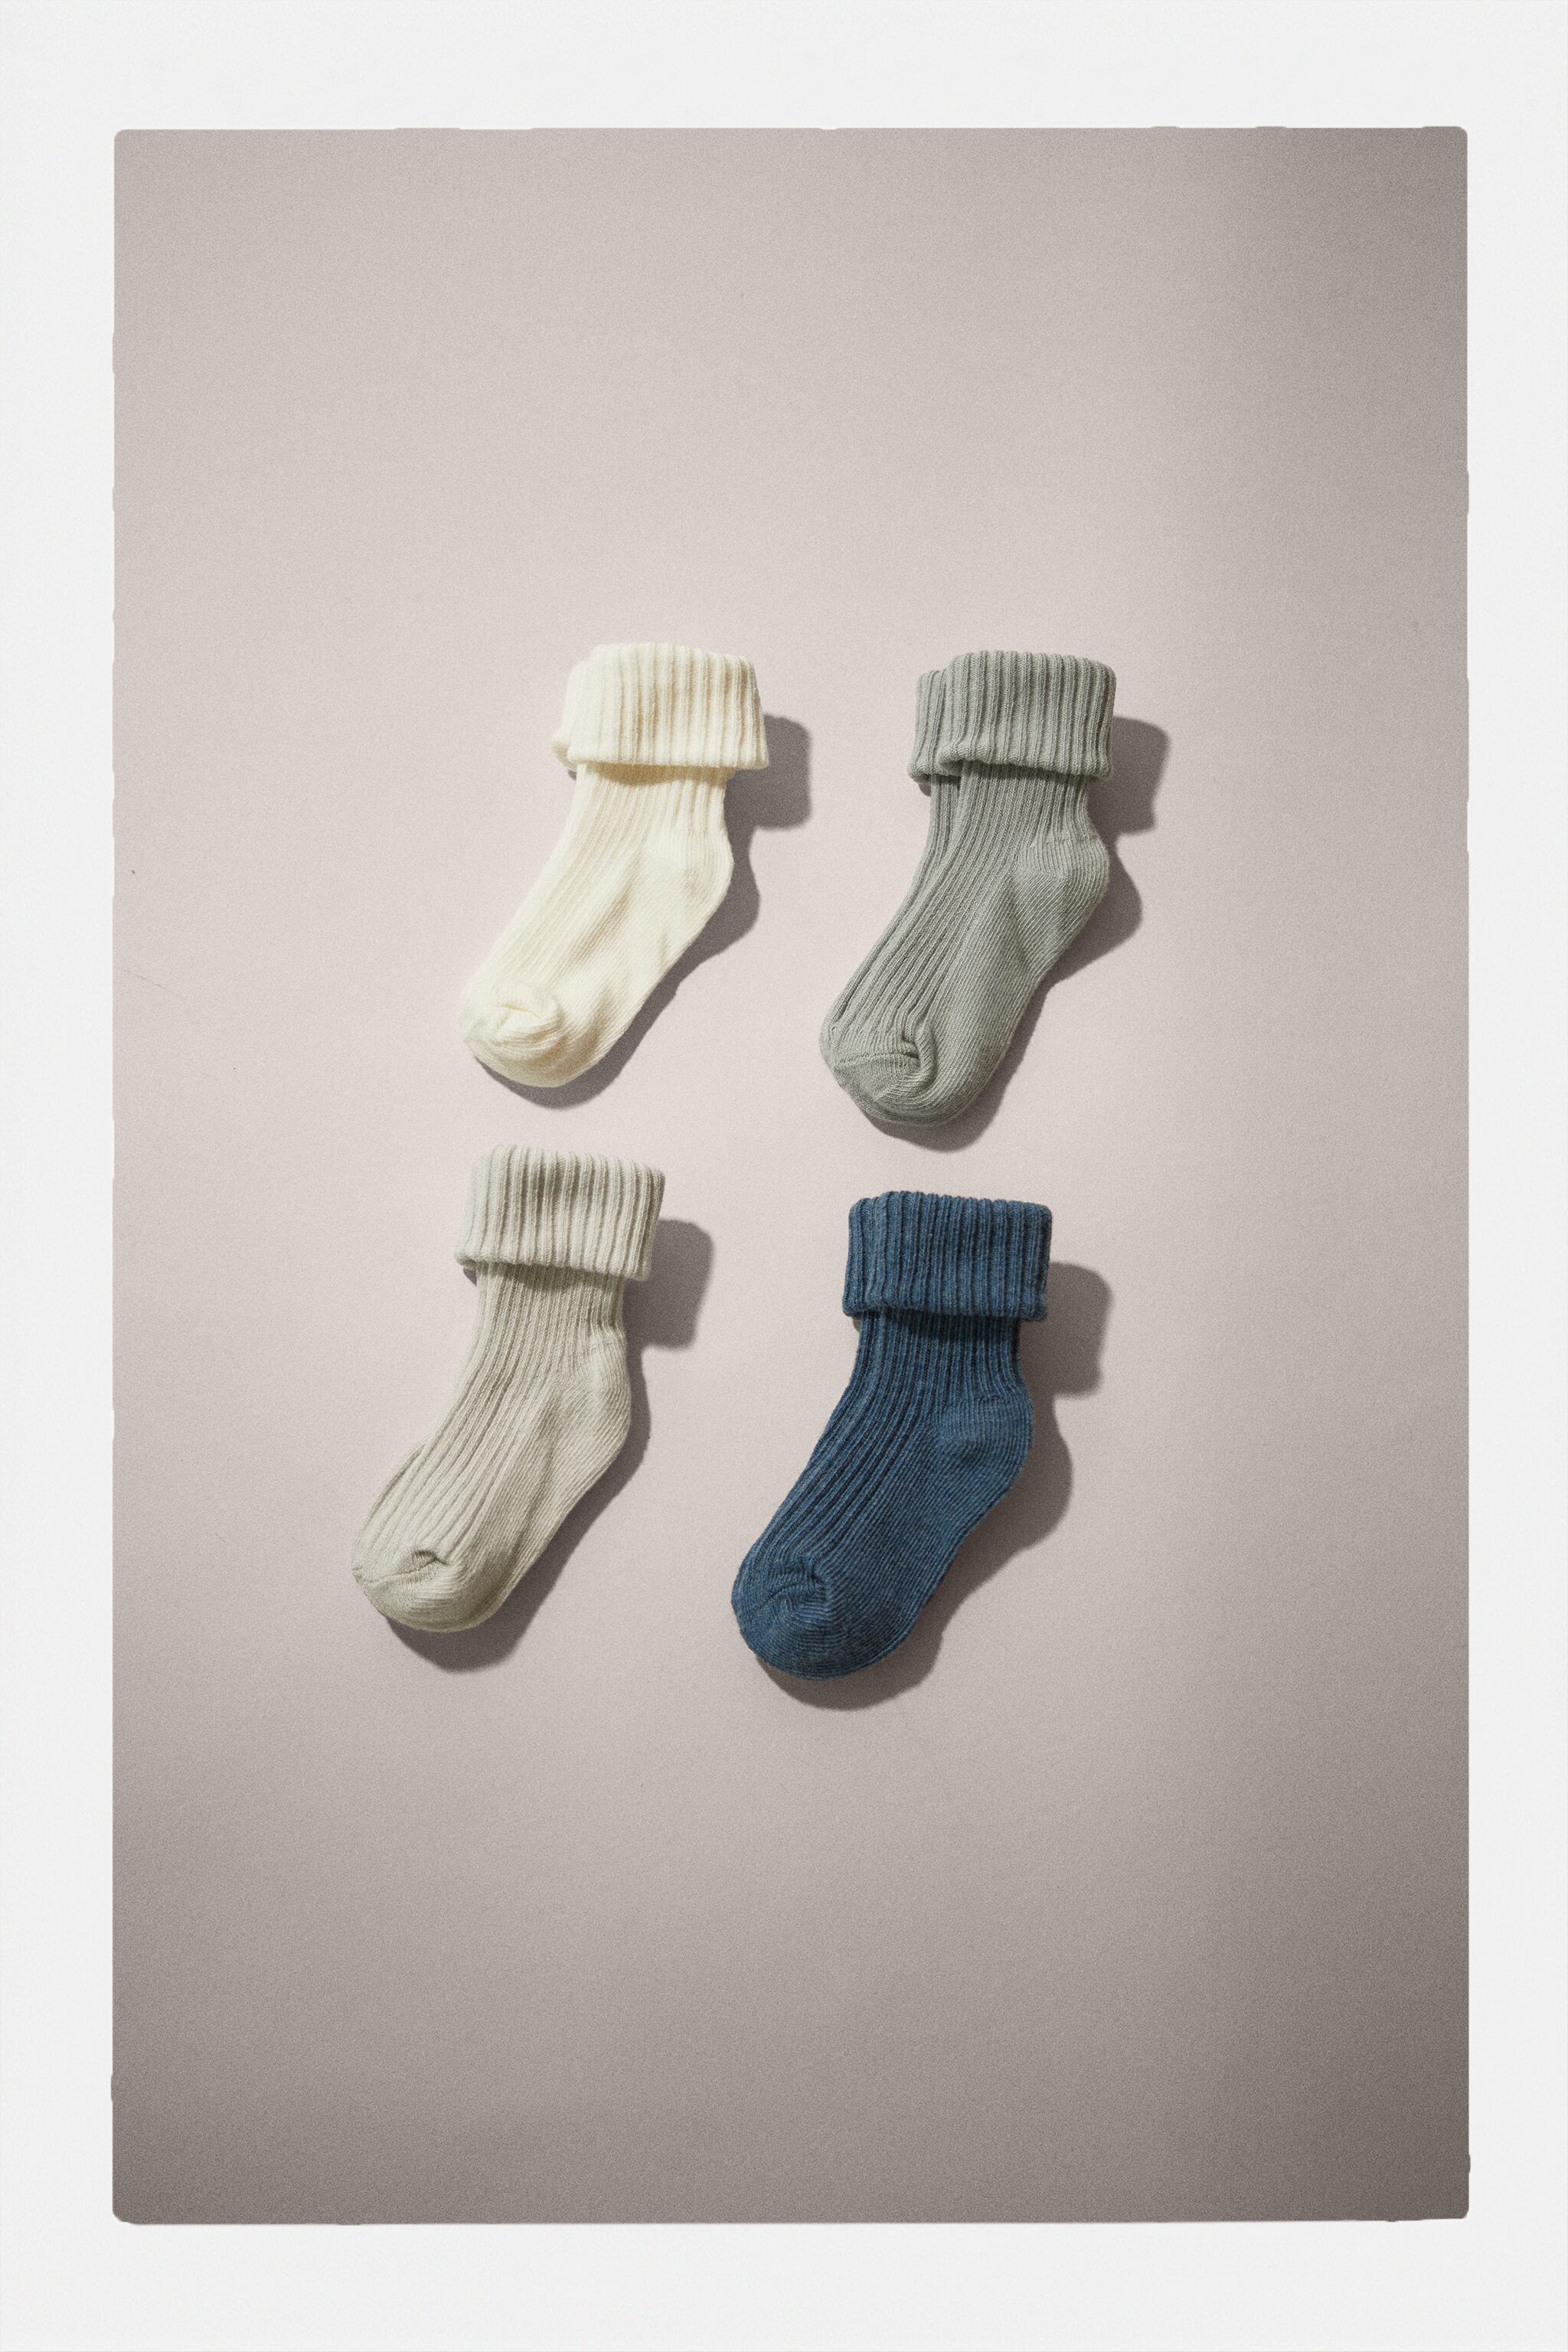 FOUR-PACK OF COLORFUL SOCKS